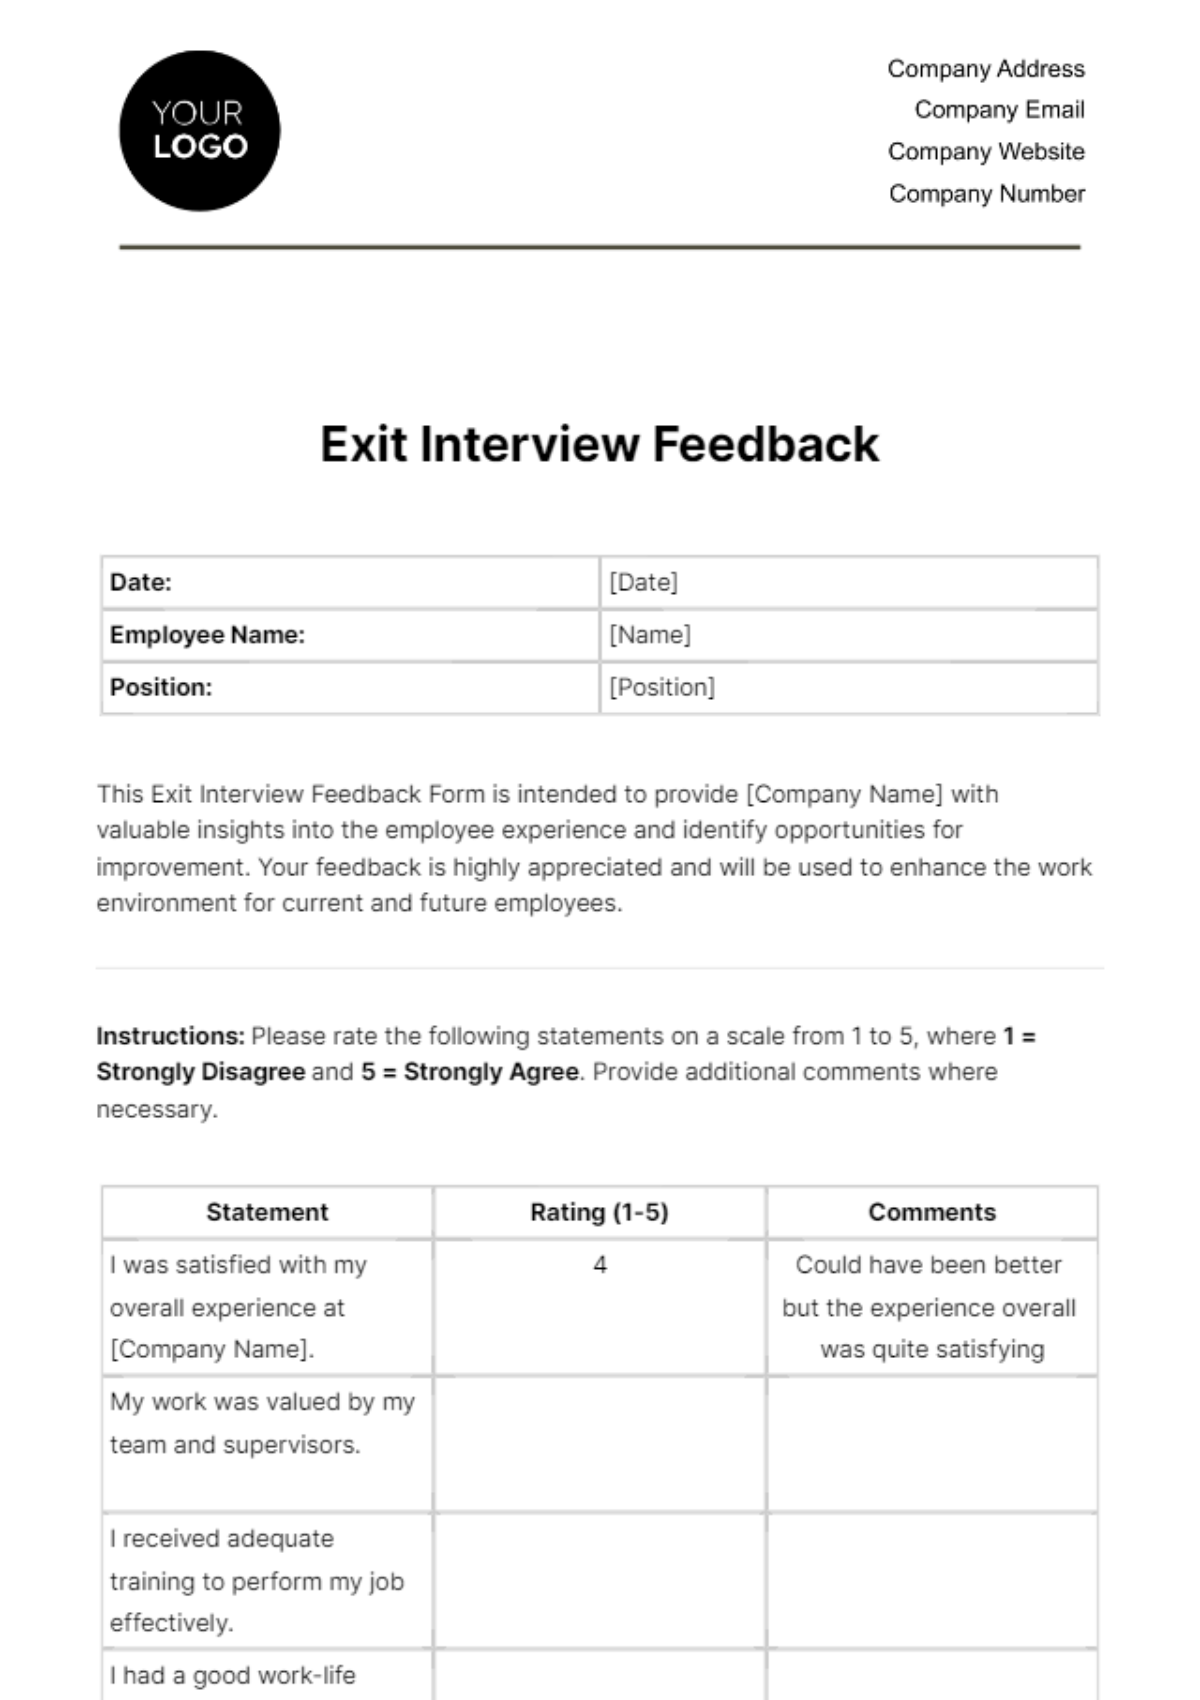 Free Exit Interview Feedback HR Template